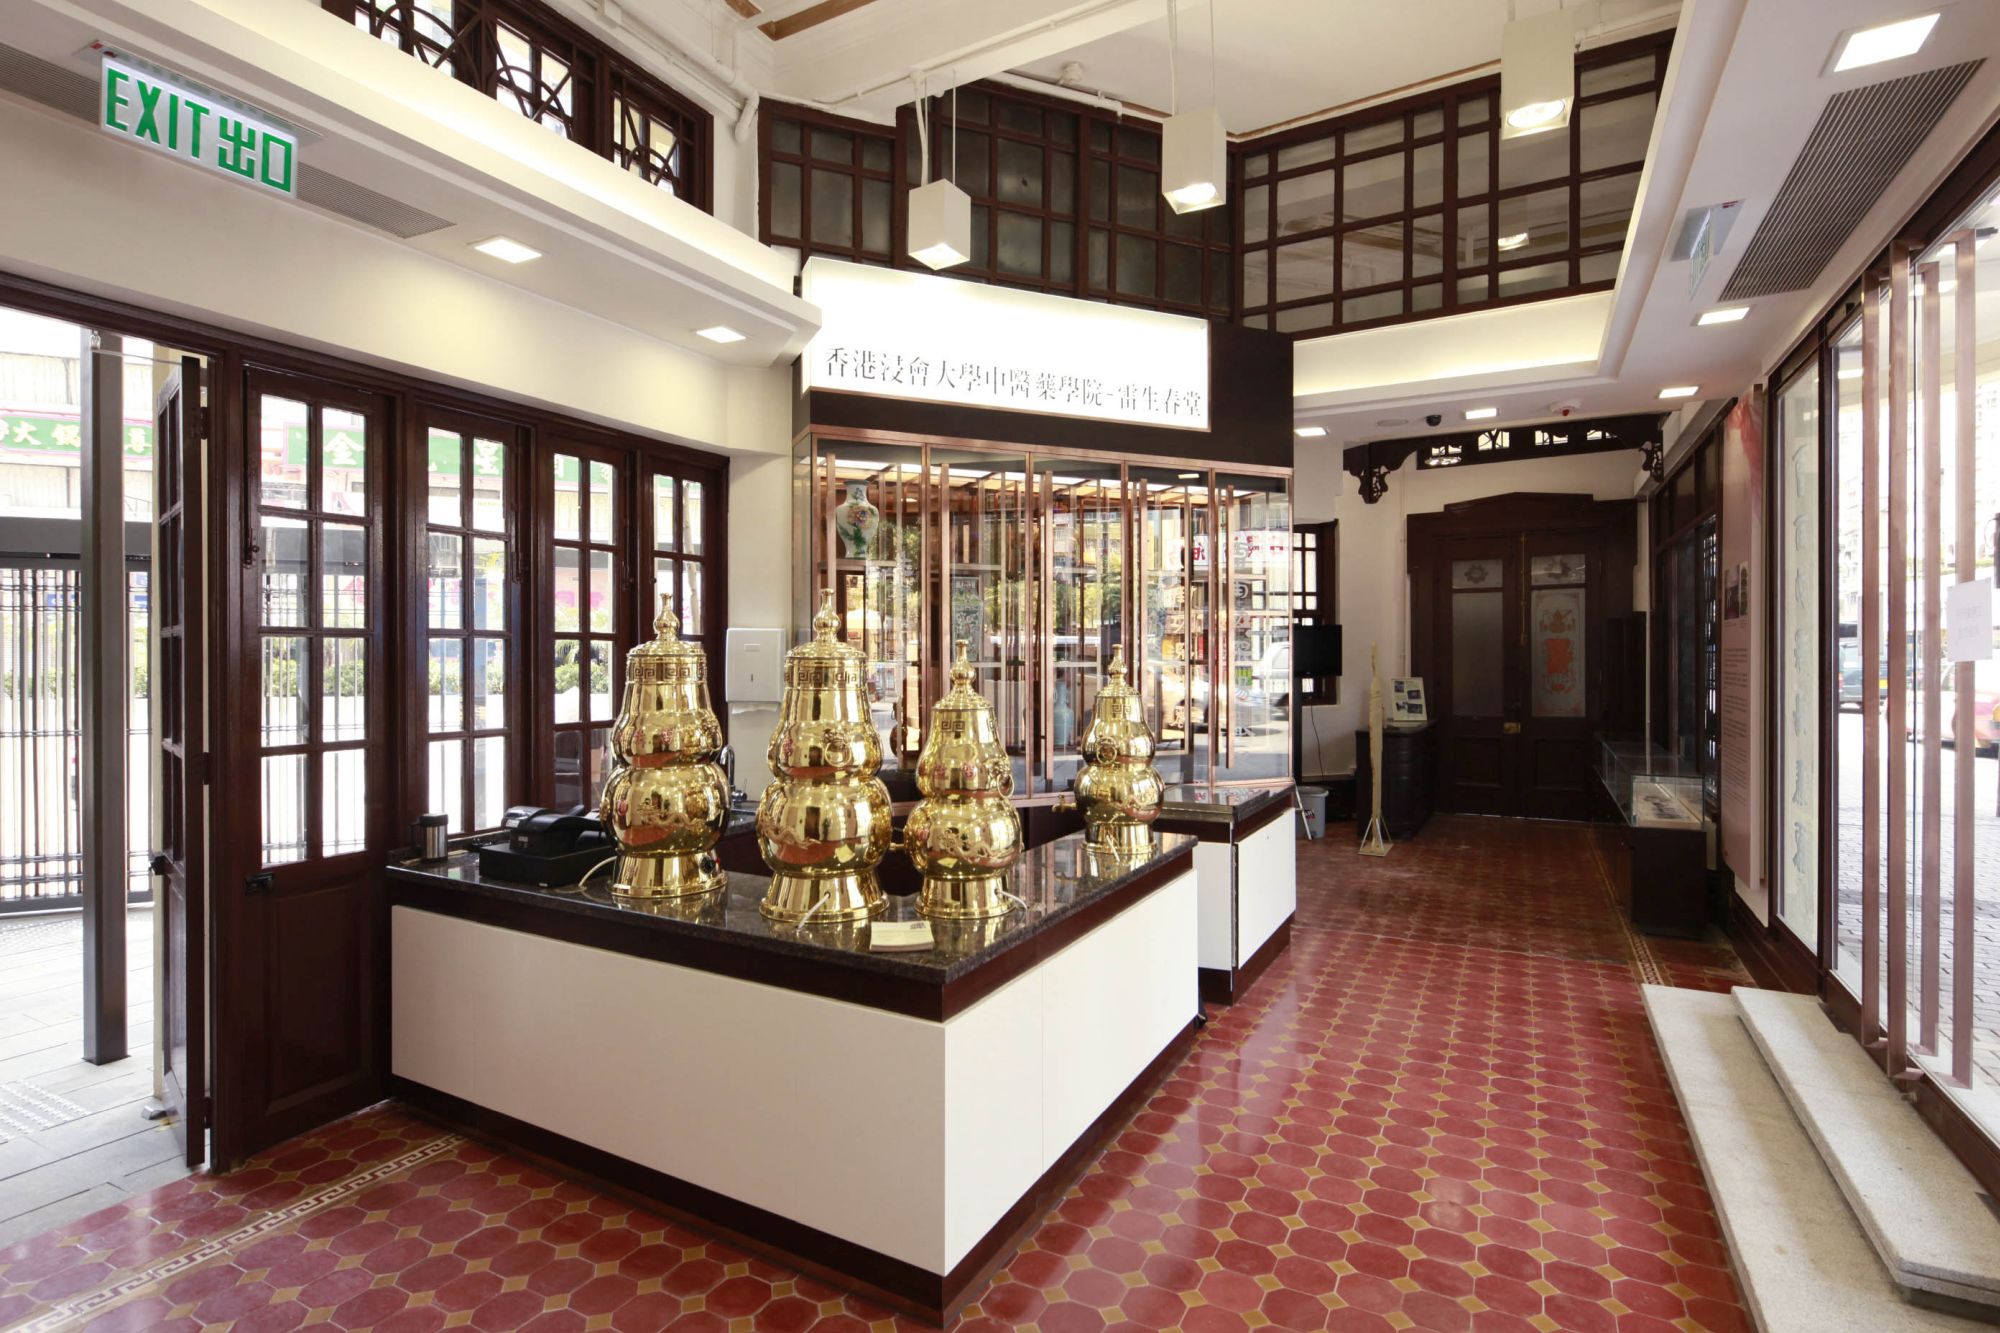 The Hong Kong Baptist University School of Chinese Medicine – Lui Seng Chun commenced operation in April 2012, with consultation rooms, a Chinese medicine shop, a herbal tea counter, etc.